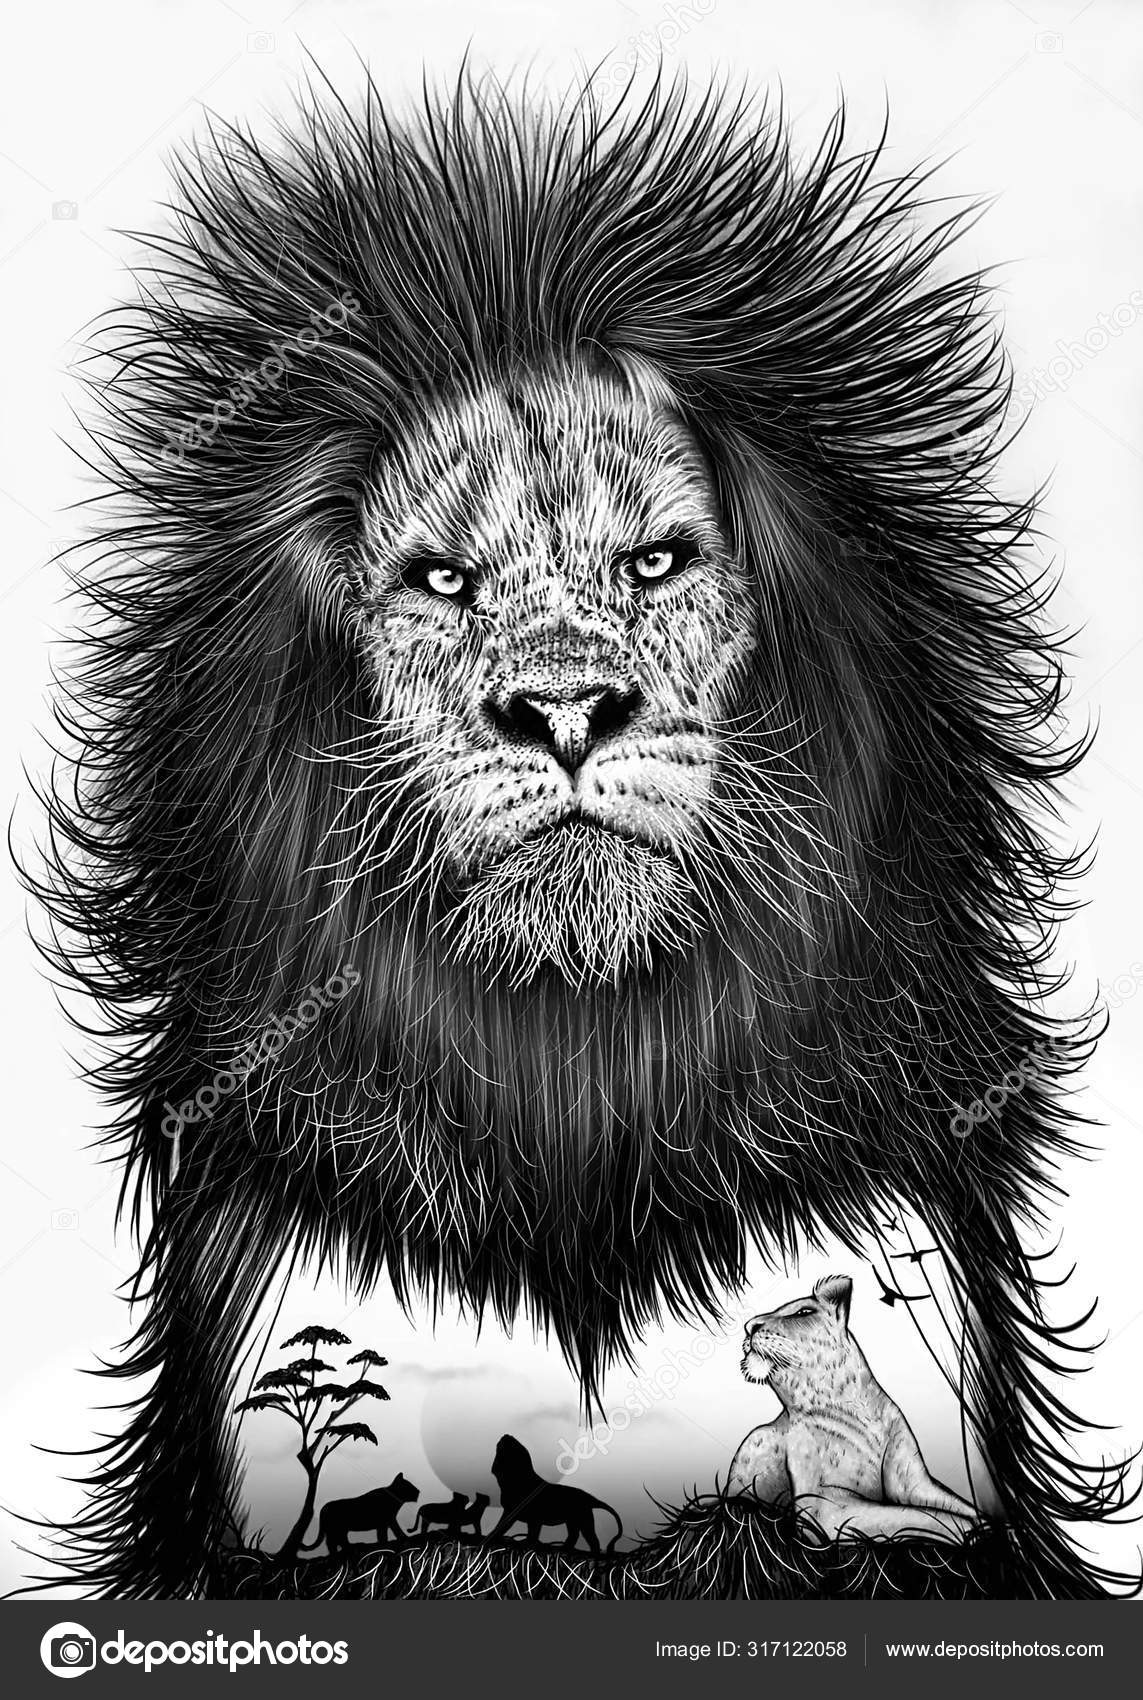 Lion drawing Stock Photos, Royalty Free Lion drawing Images | Depositphotos